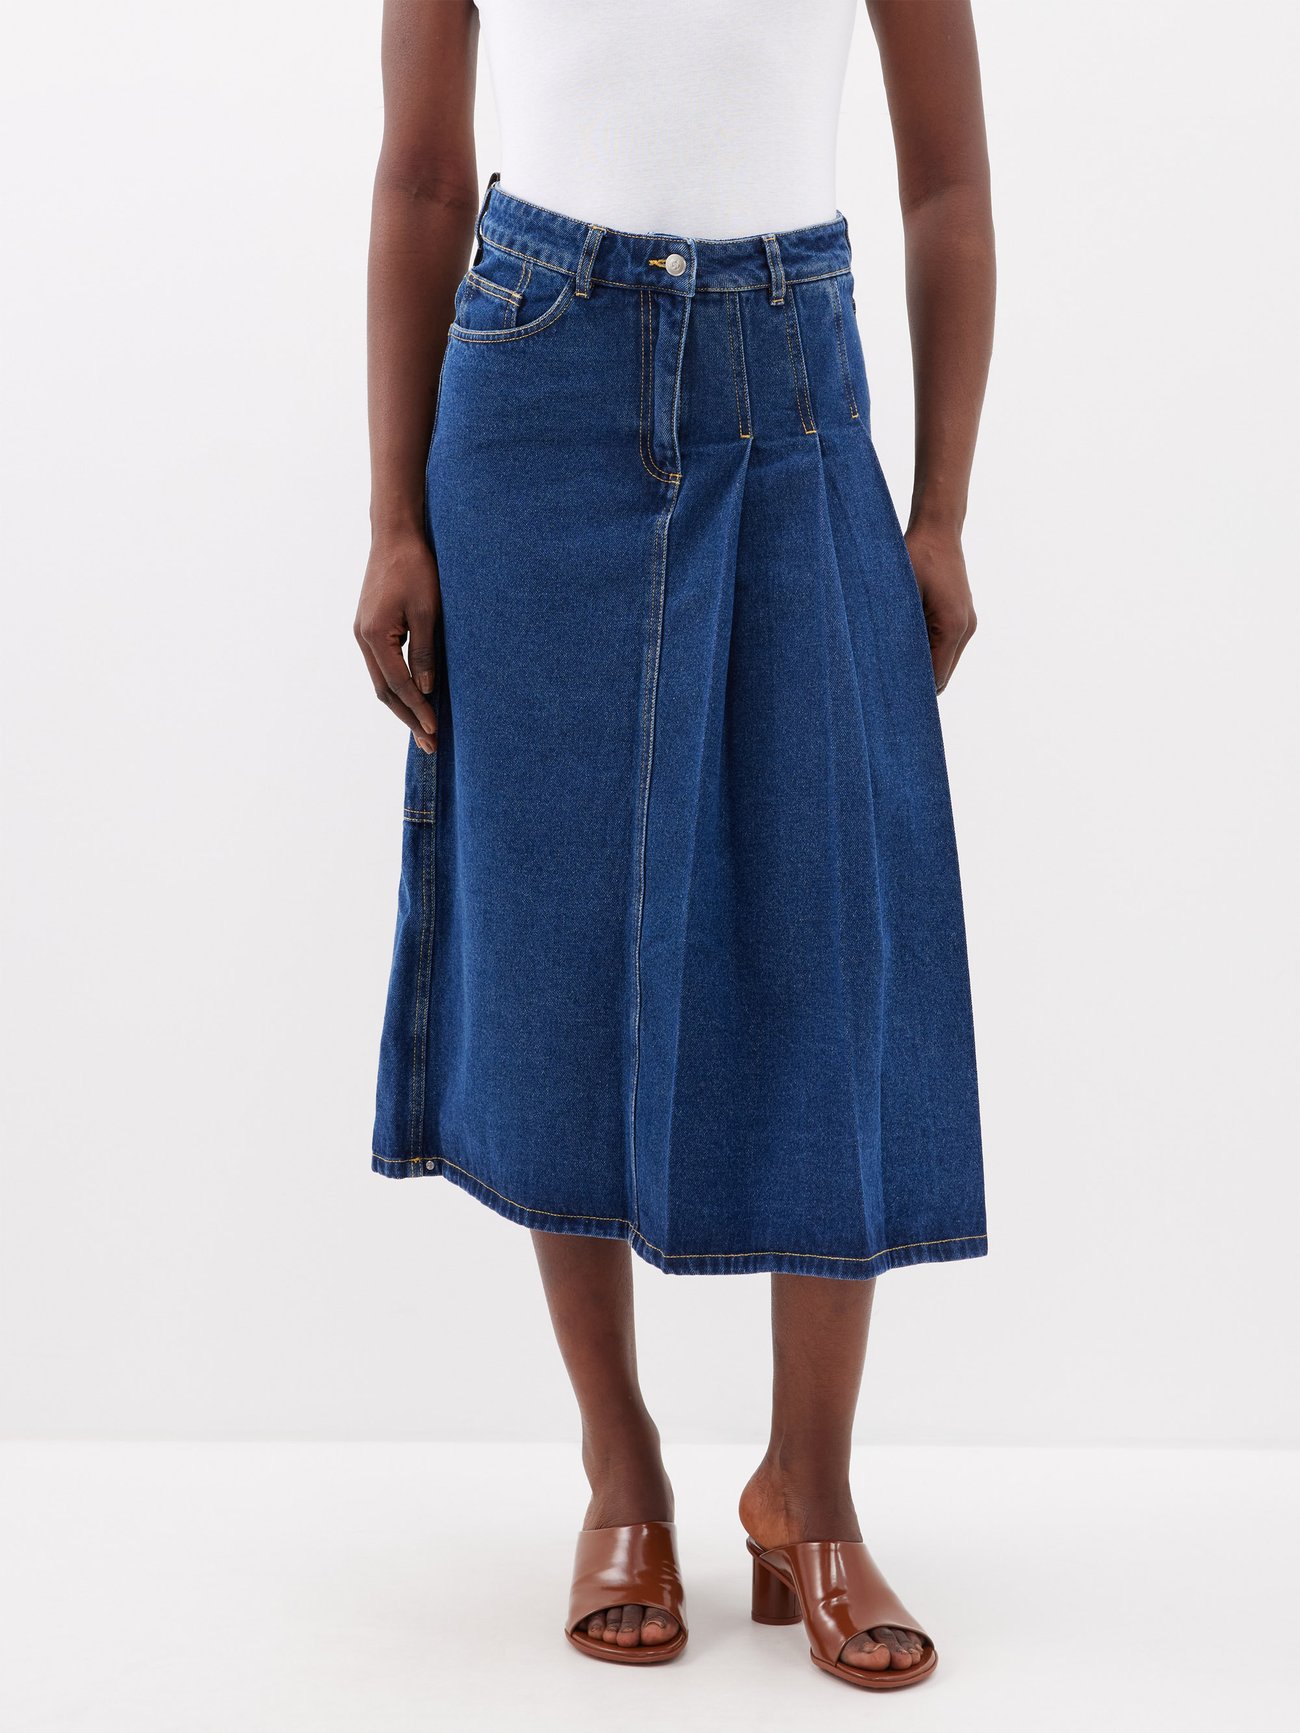 Saks Potts' Bier skirt is made from organic cotton denim with kilt-pleats panels adding movement to the long midi-length silhouette.